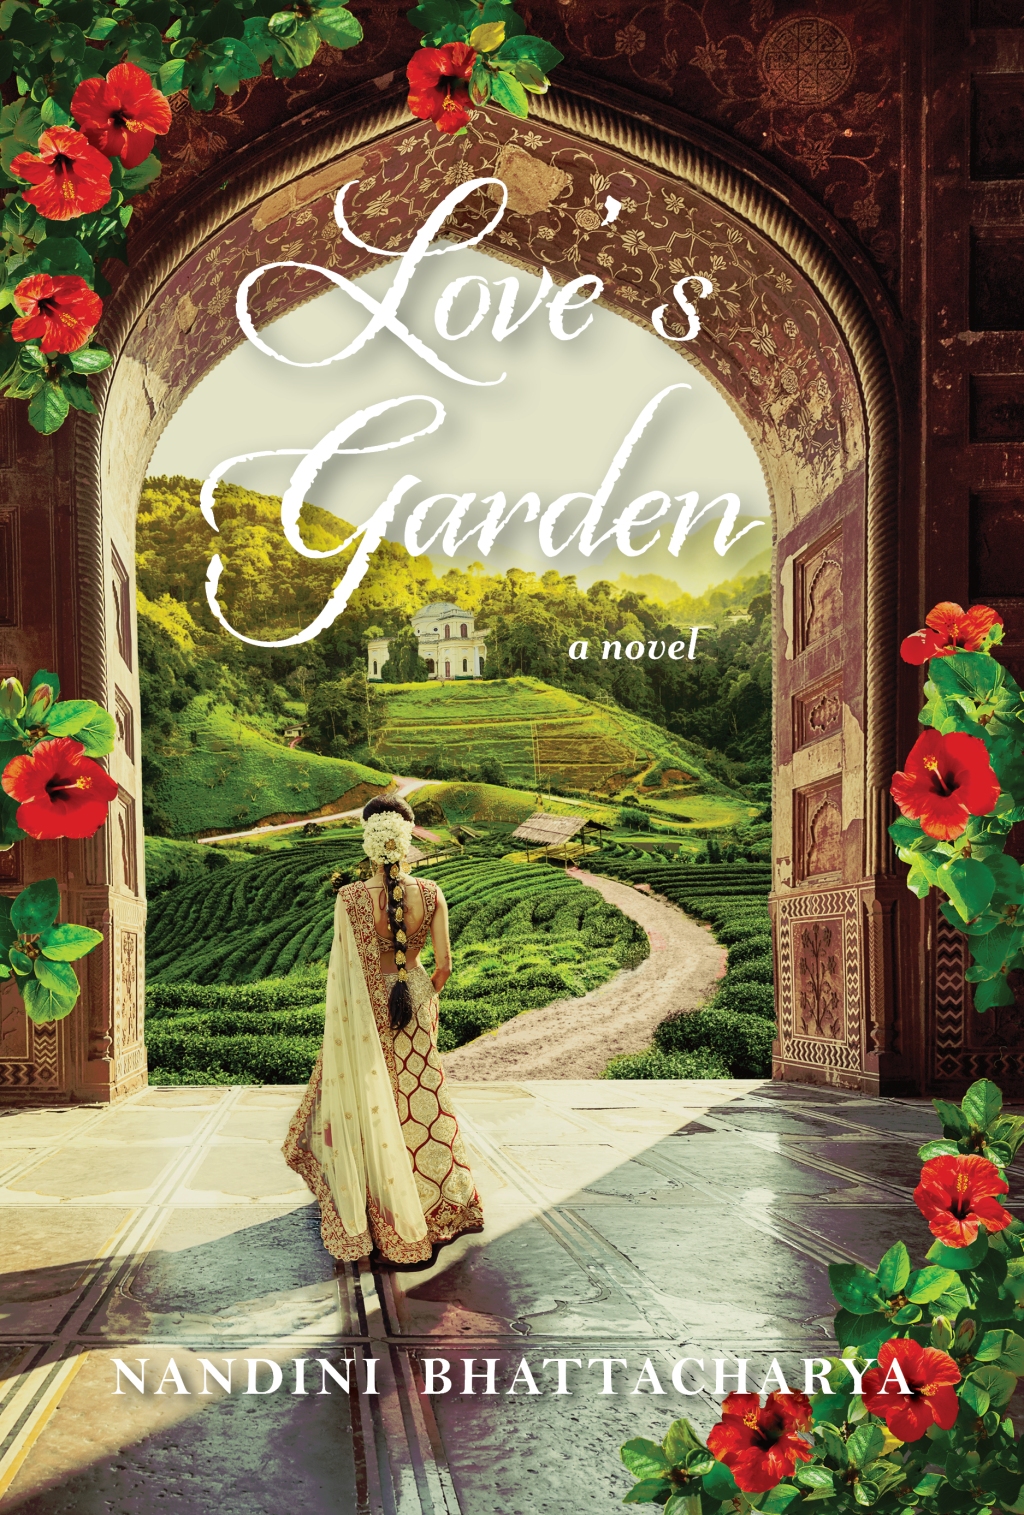 Read Love’s Garden for free in the next two months